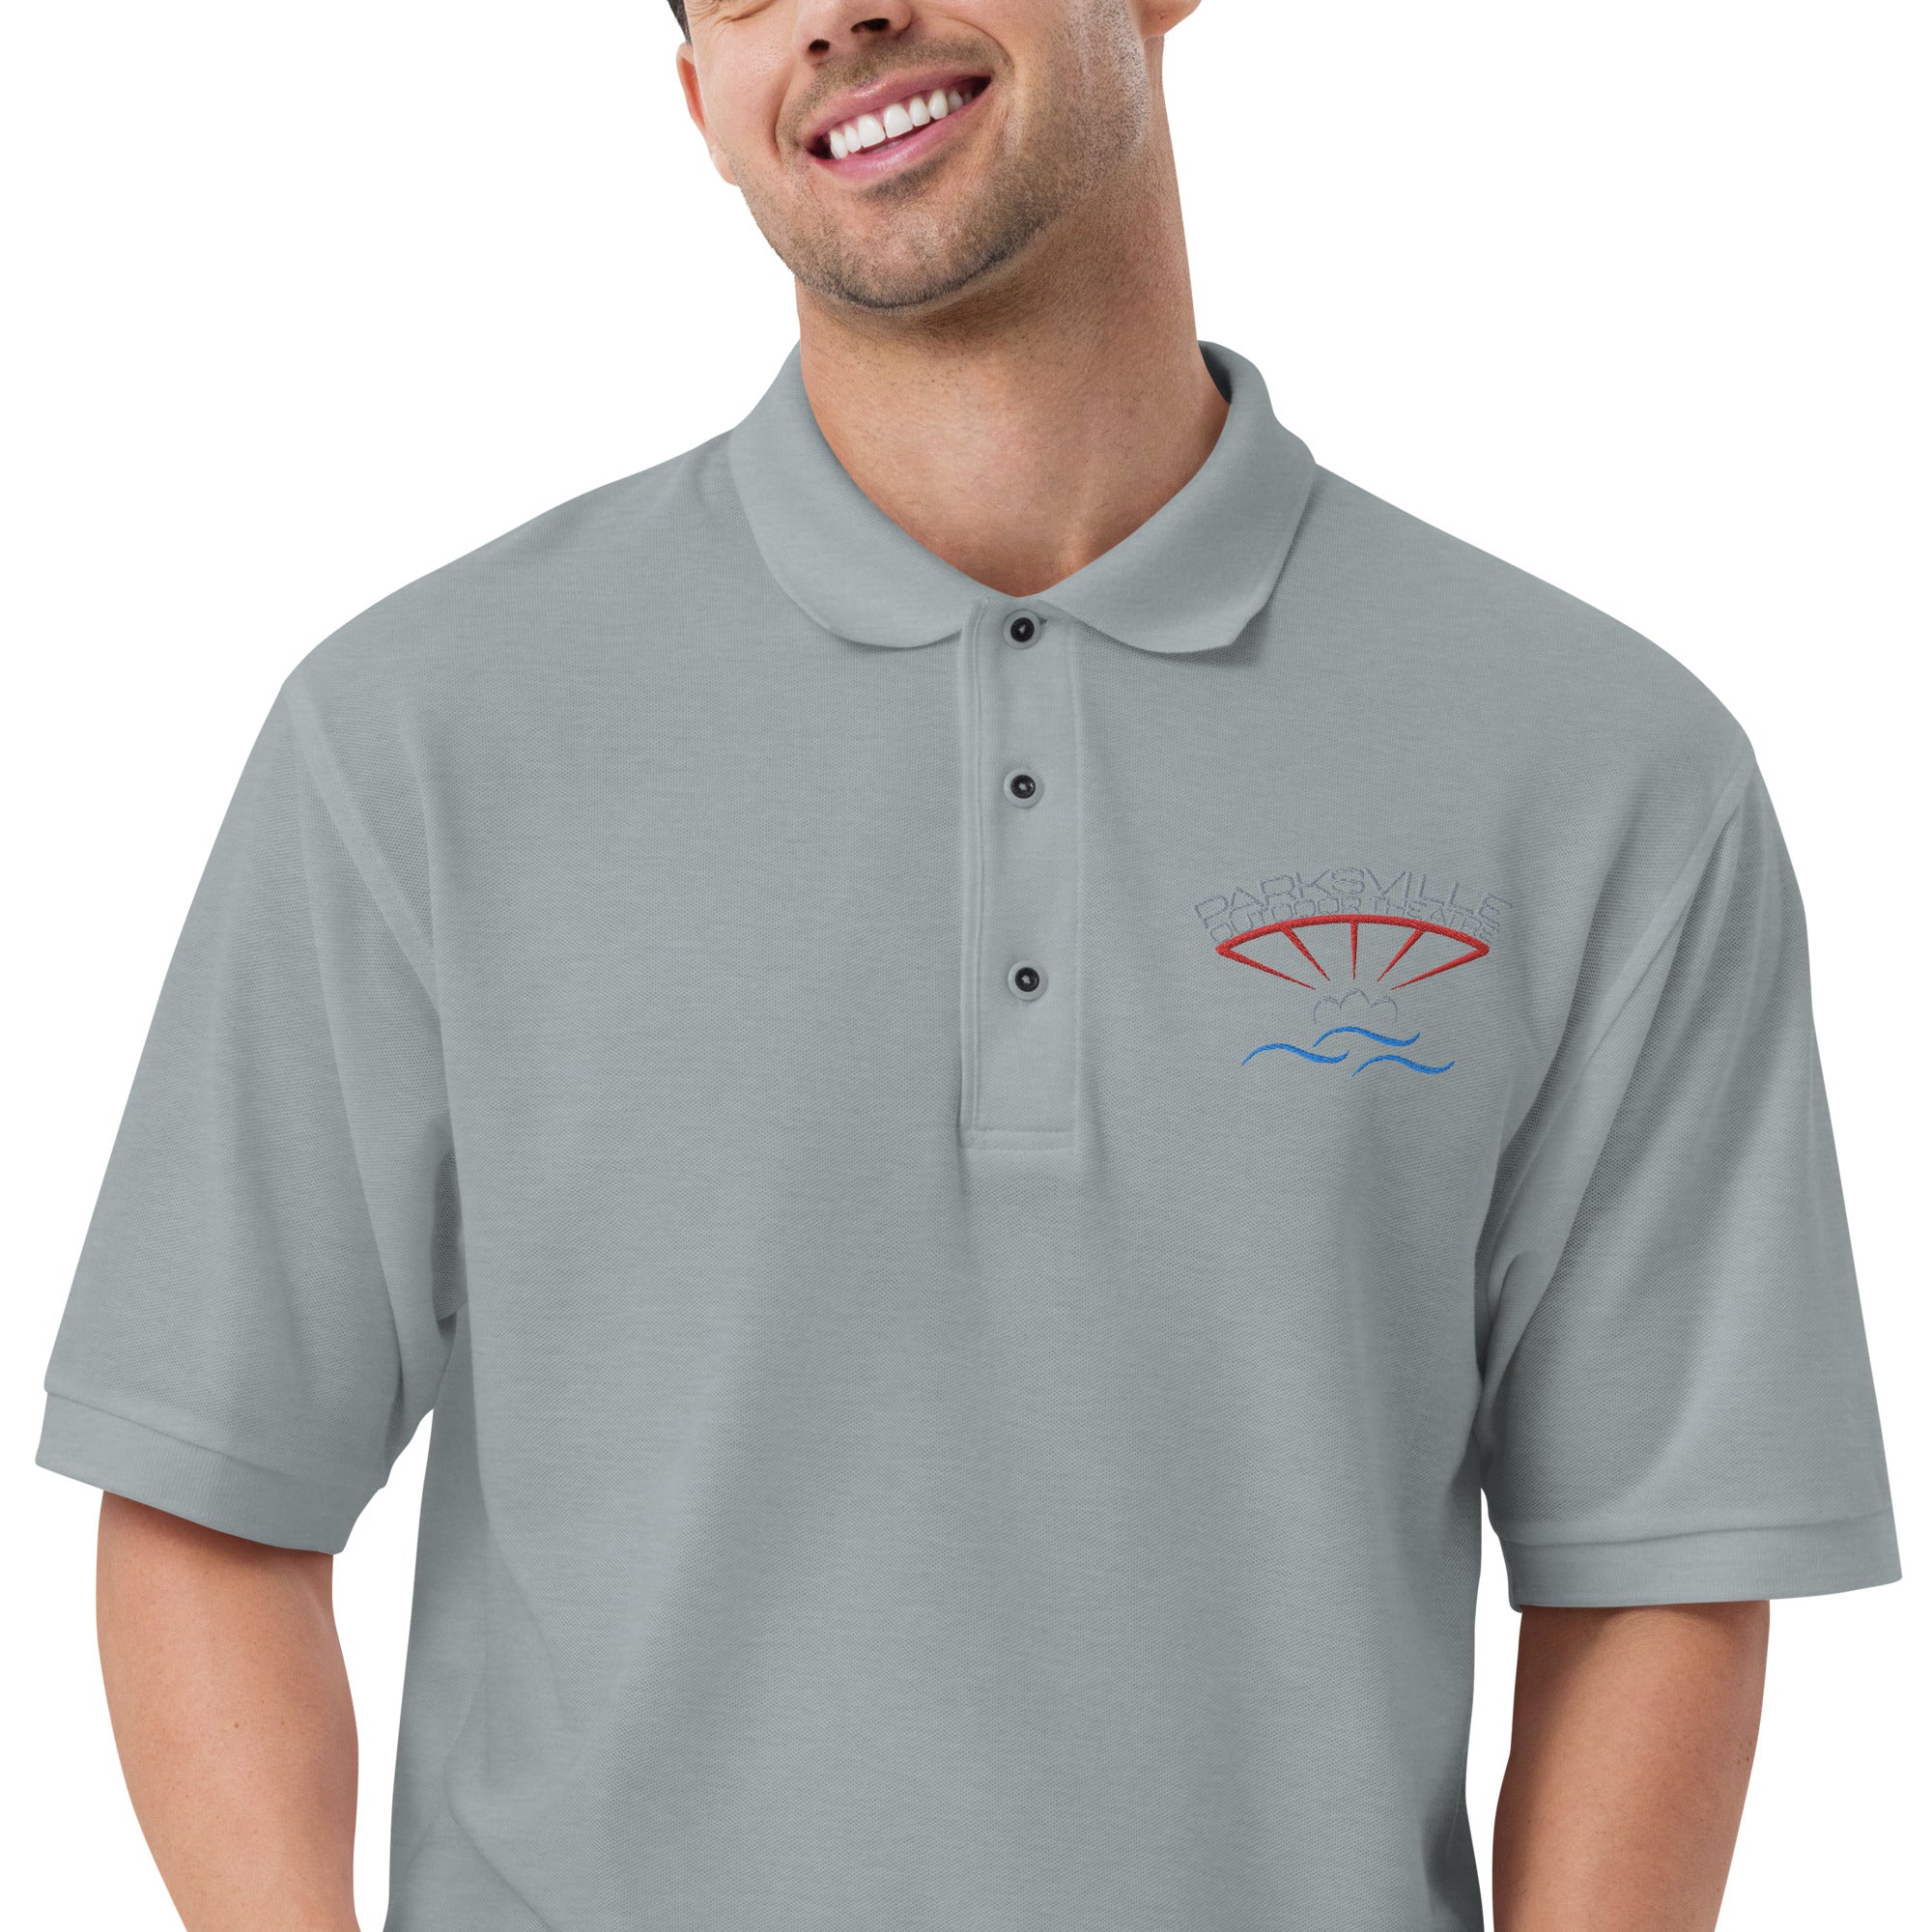 Parksville Outdoor Theatre - Men's Premium Embroidered Polo/Golf Shirt